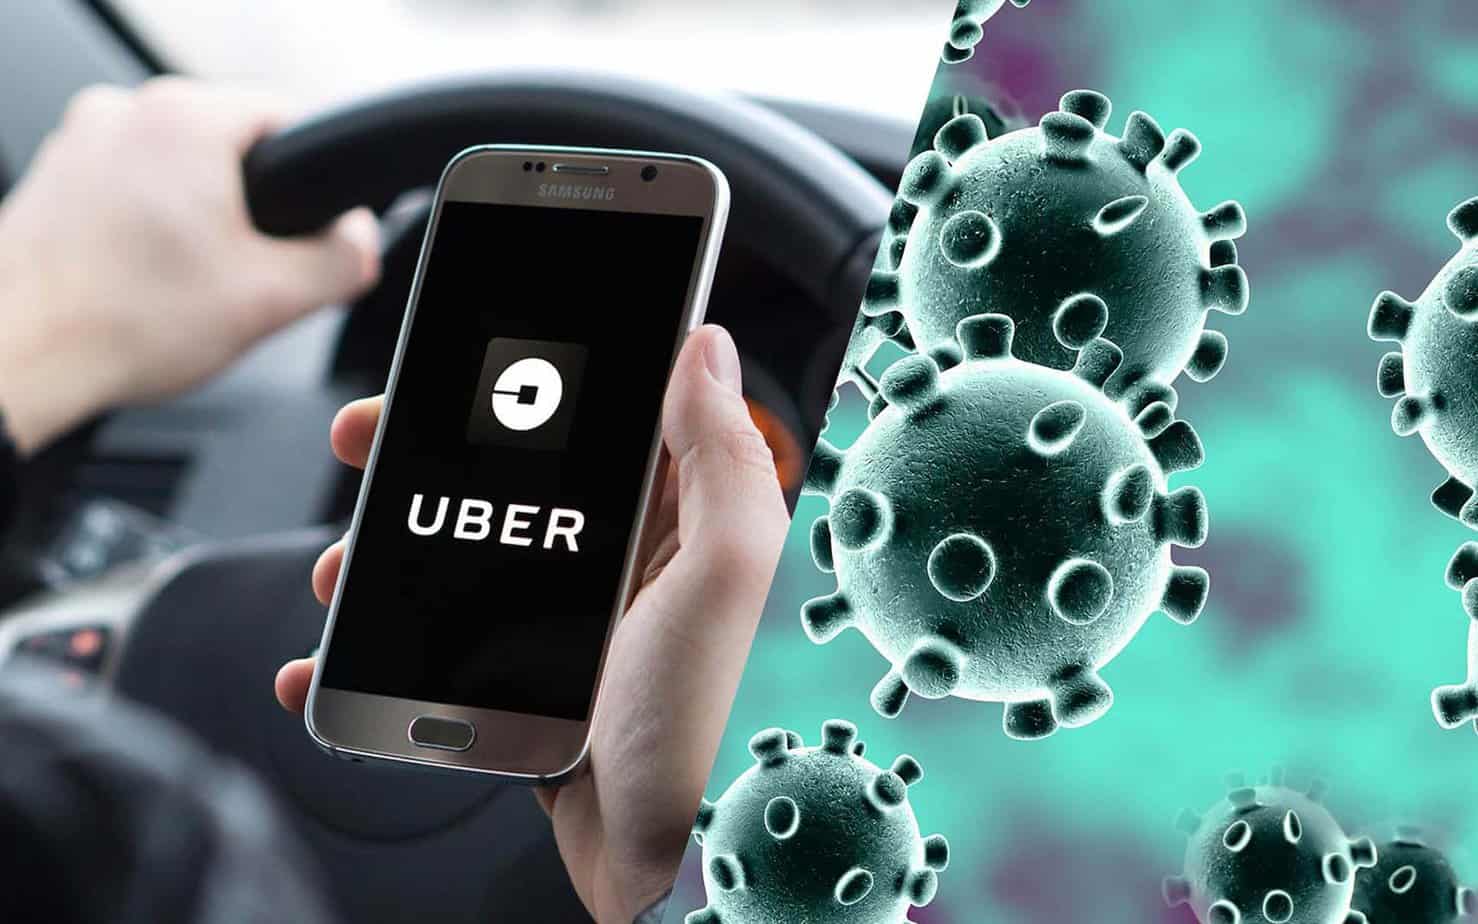 UBER AIDS THE CORONAVIRUS CONCERNS - Offers paid time off